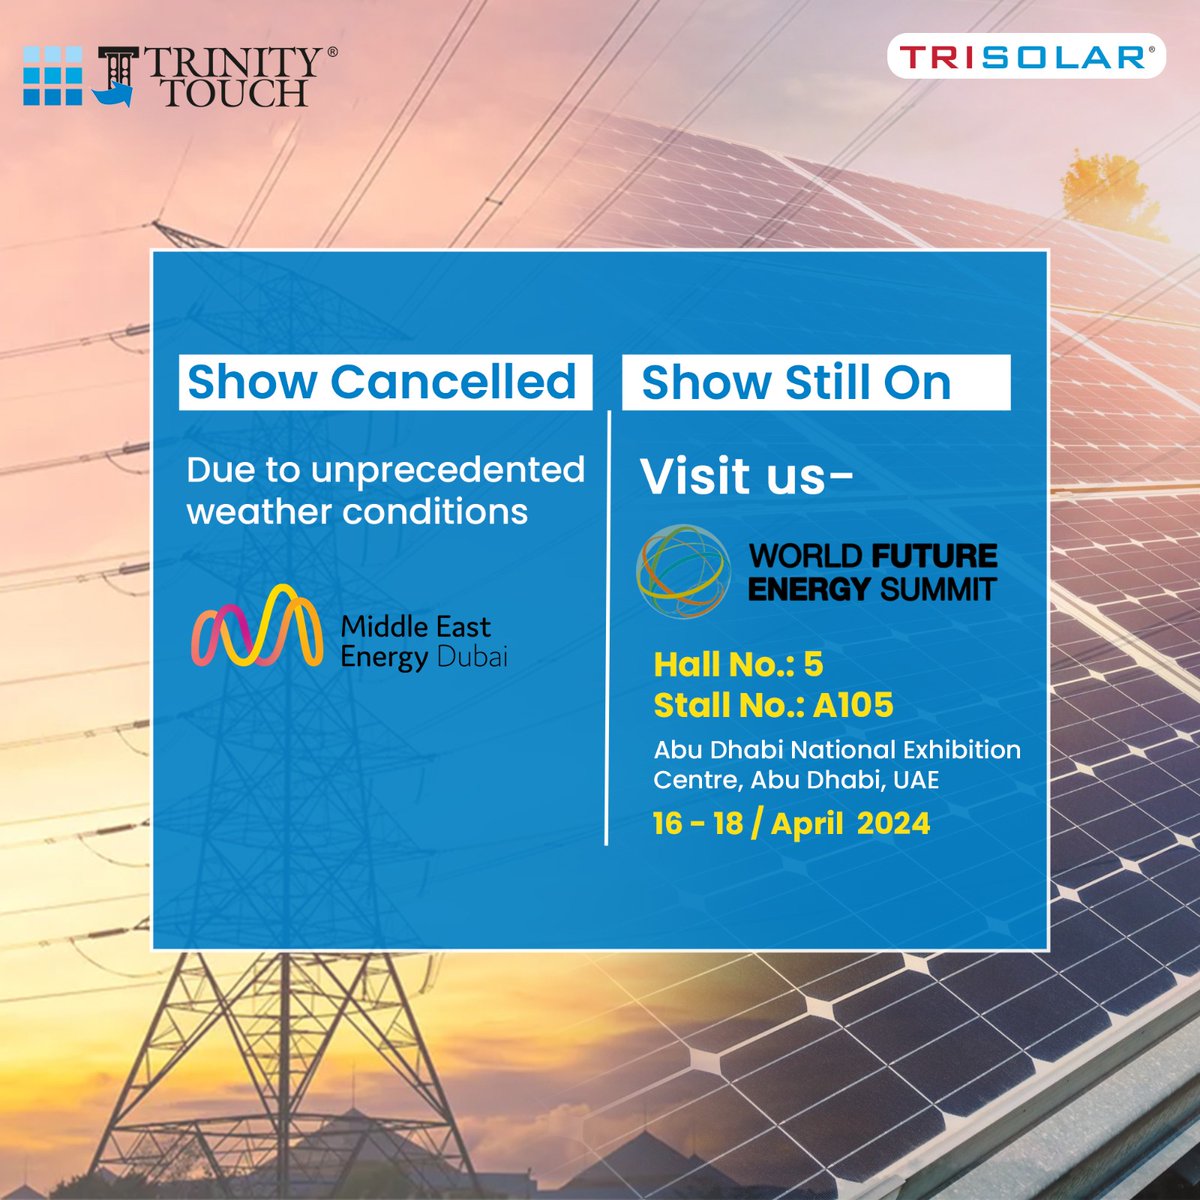 It is with a heavy heart that we announce the cancellation of the Middle East Energy Expo 2024, originally scheduled to take place from April 17th to 19th, 2024 in the UAE 

Thank you for your patience and continued commitment to our event.

#TrinityTouch #Globalexpo #UAE